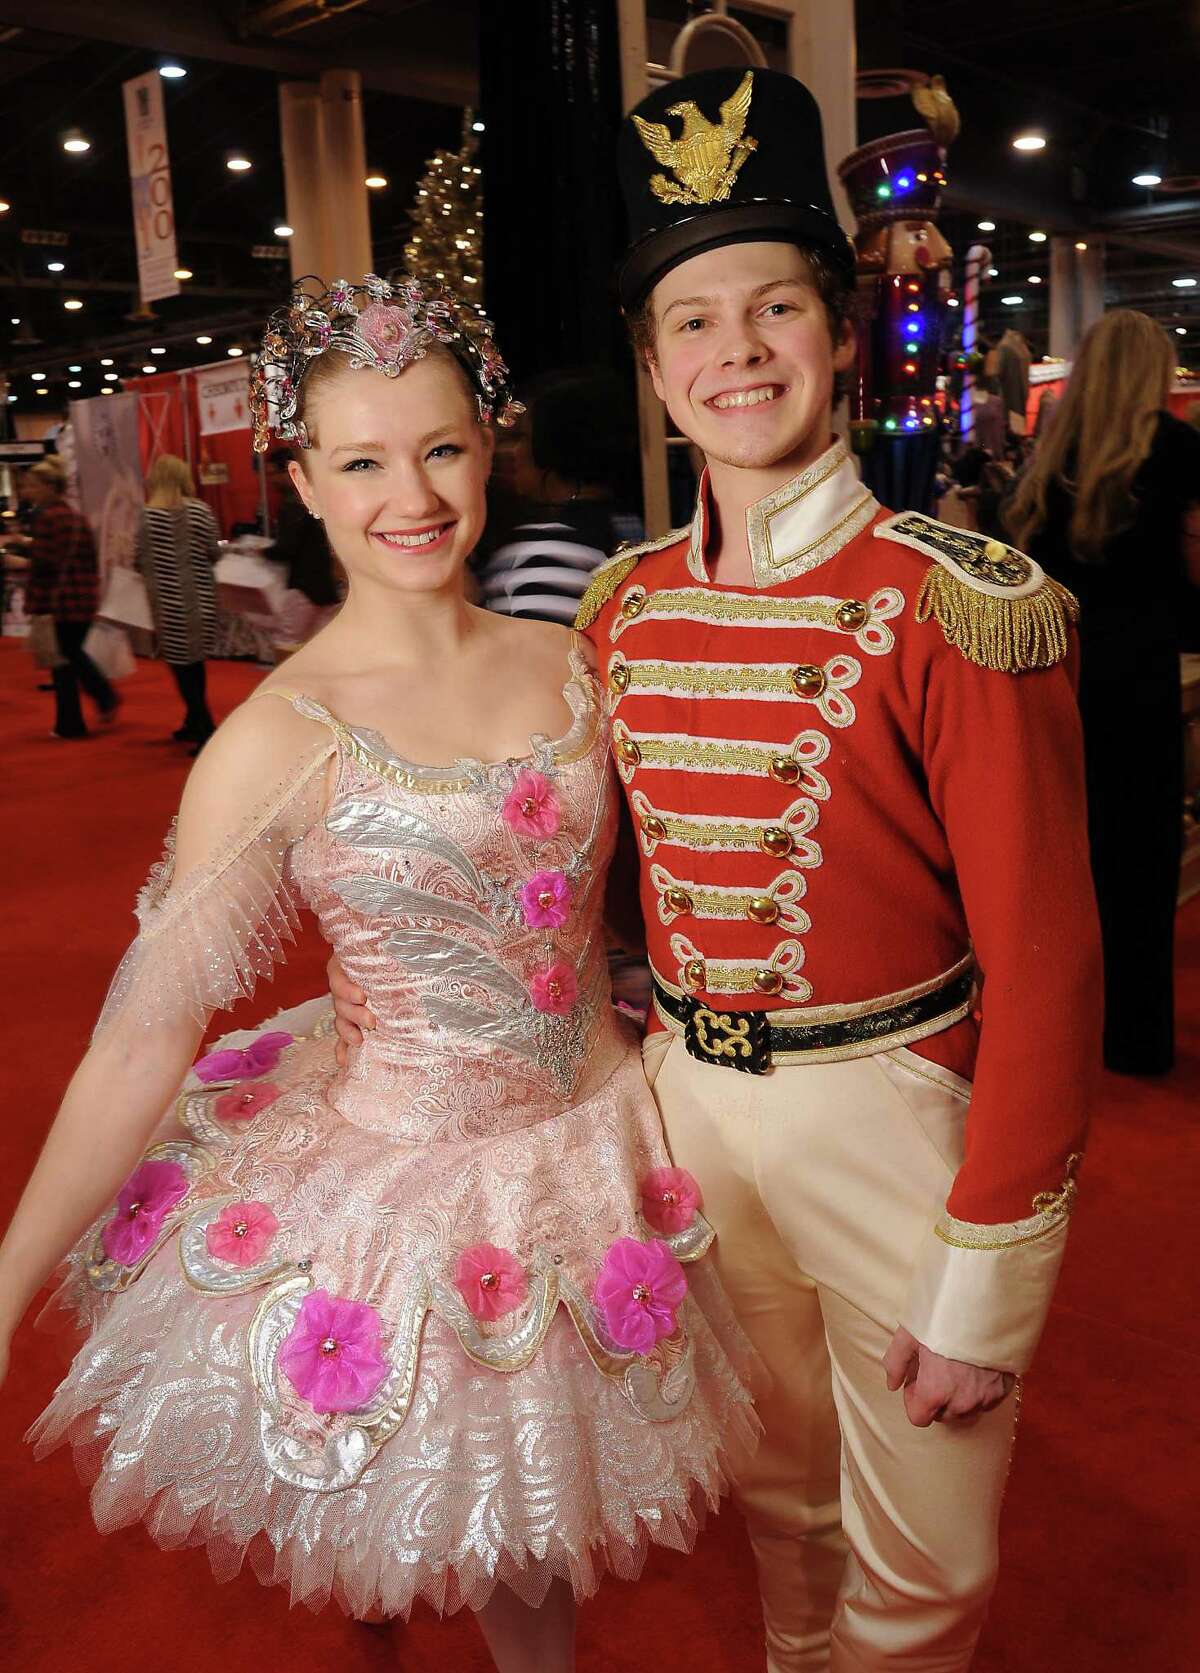 Hacks, tricks for the Nutcracker Market The annual event brings thousands of holiday shoppers to the NRG Center for an entire weekend of shopping festivities. Several Houston Chronicle employees have gone to the annual event for years and they're sharing their tips, tricks, and hacks to properly succeeding at the Nutcracker Market. Continue through the photos to see the tips for the annual event. 